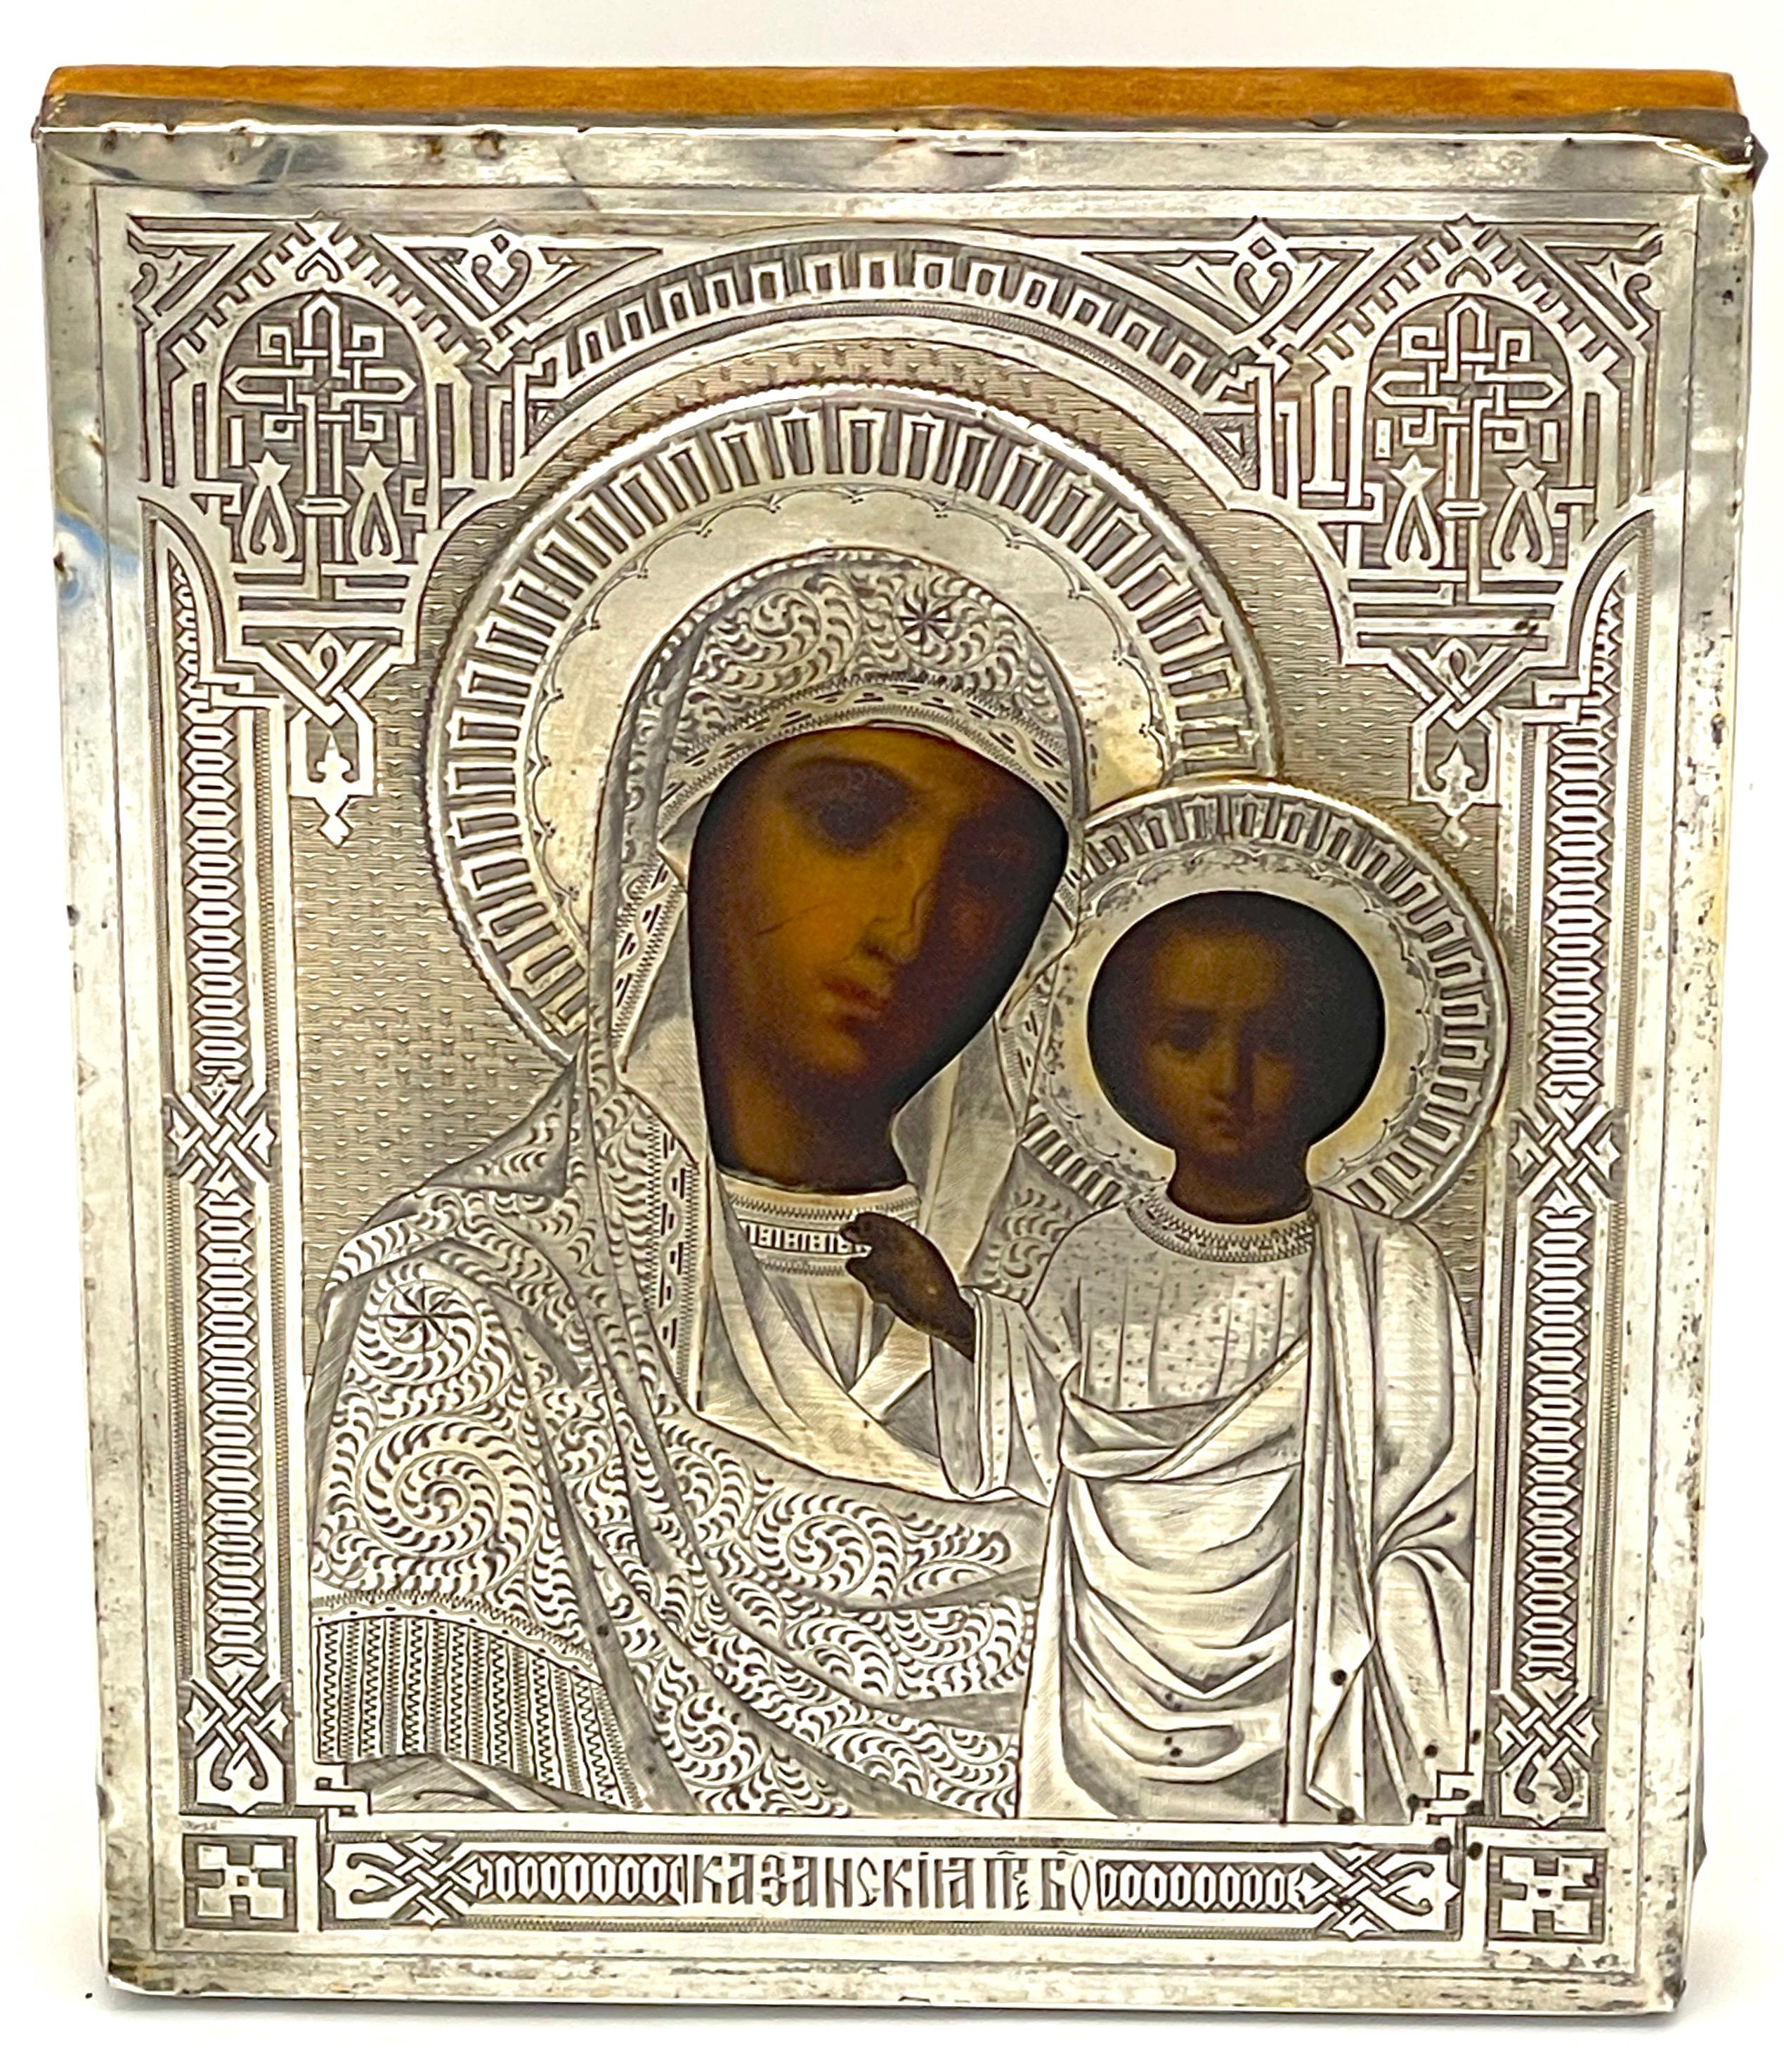 Russian Silver Icon, Our Lady of Kazan  1886
Bearing numerous Russian Silver hallmarks of d.c., in a rectangular 1 hallmark of 1886  and silver content hallmark of ’84 ‘

A fine example of the of Russian Orthodox tradition with this extraordinary